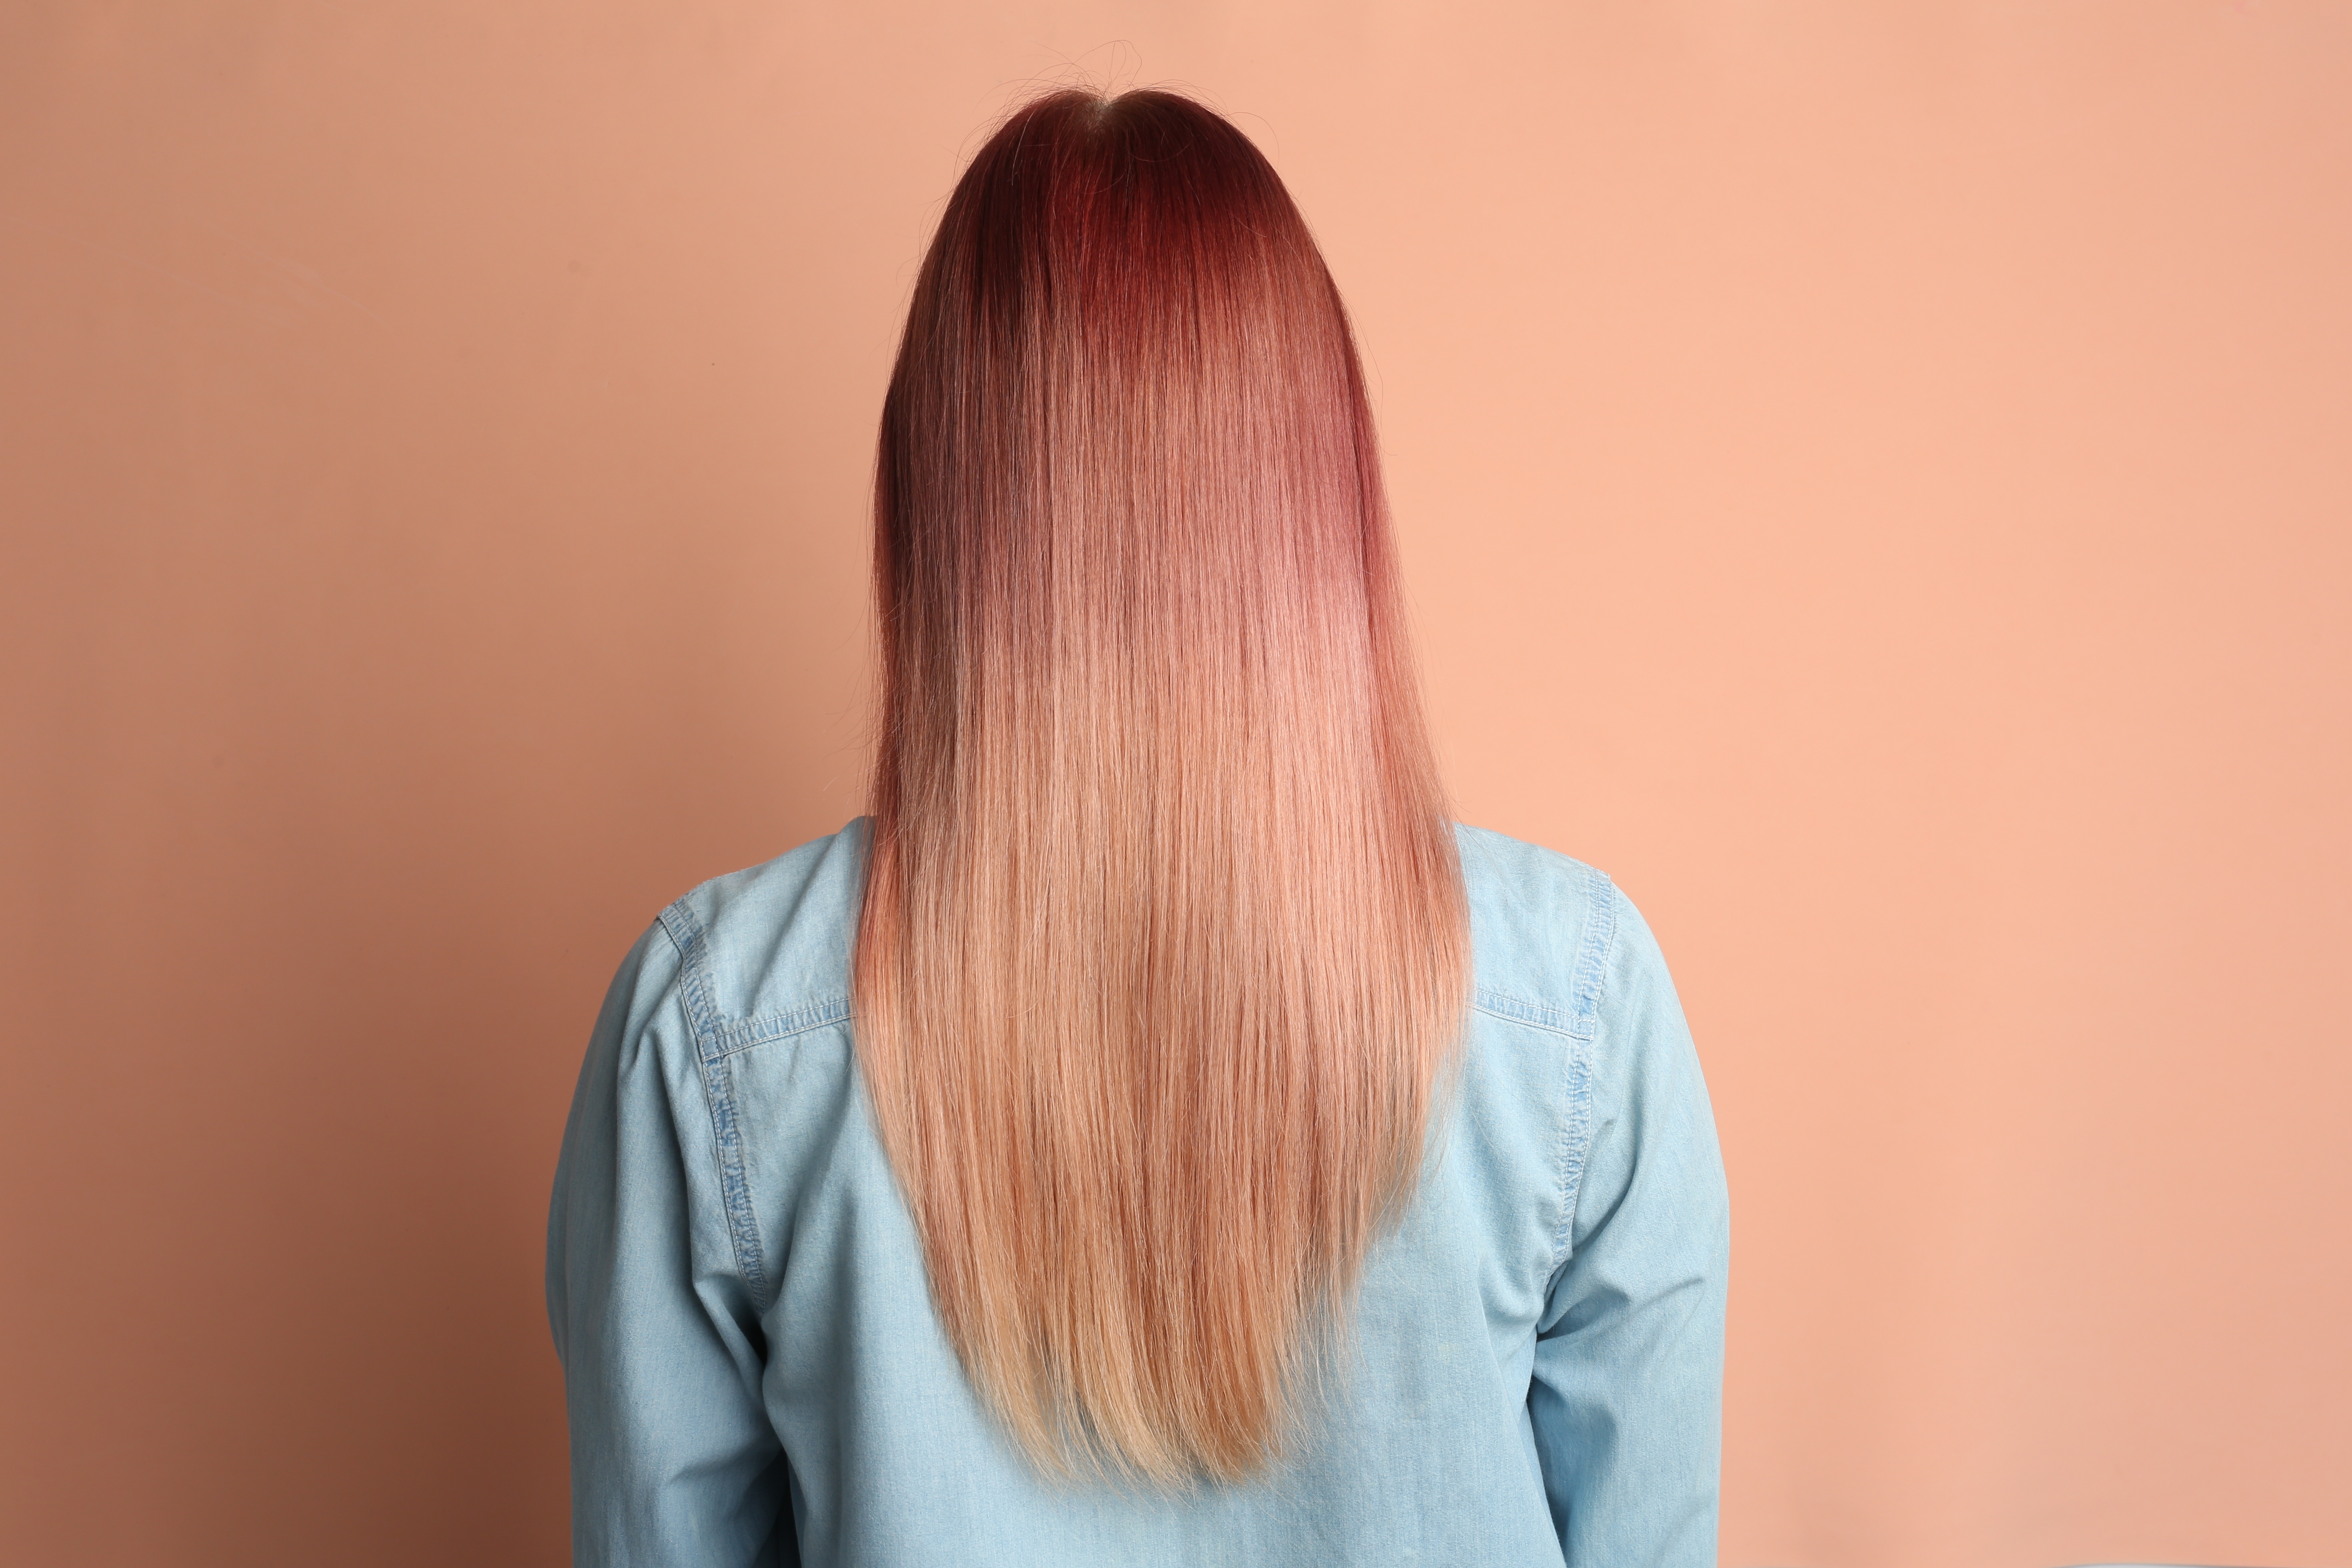 Femme aux cheveux lisses or rose | Source : Shutterstock